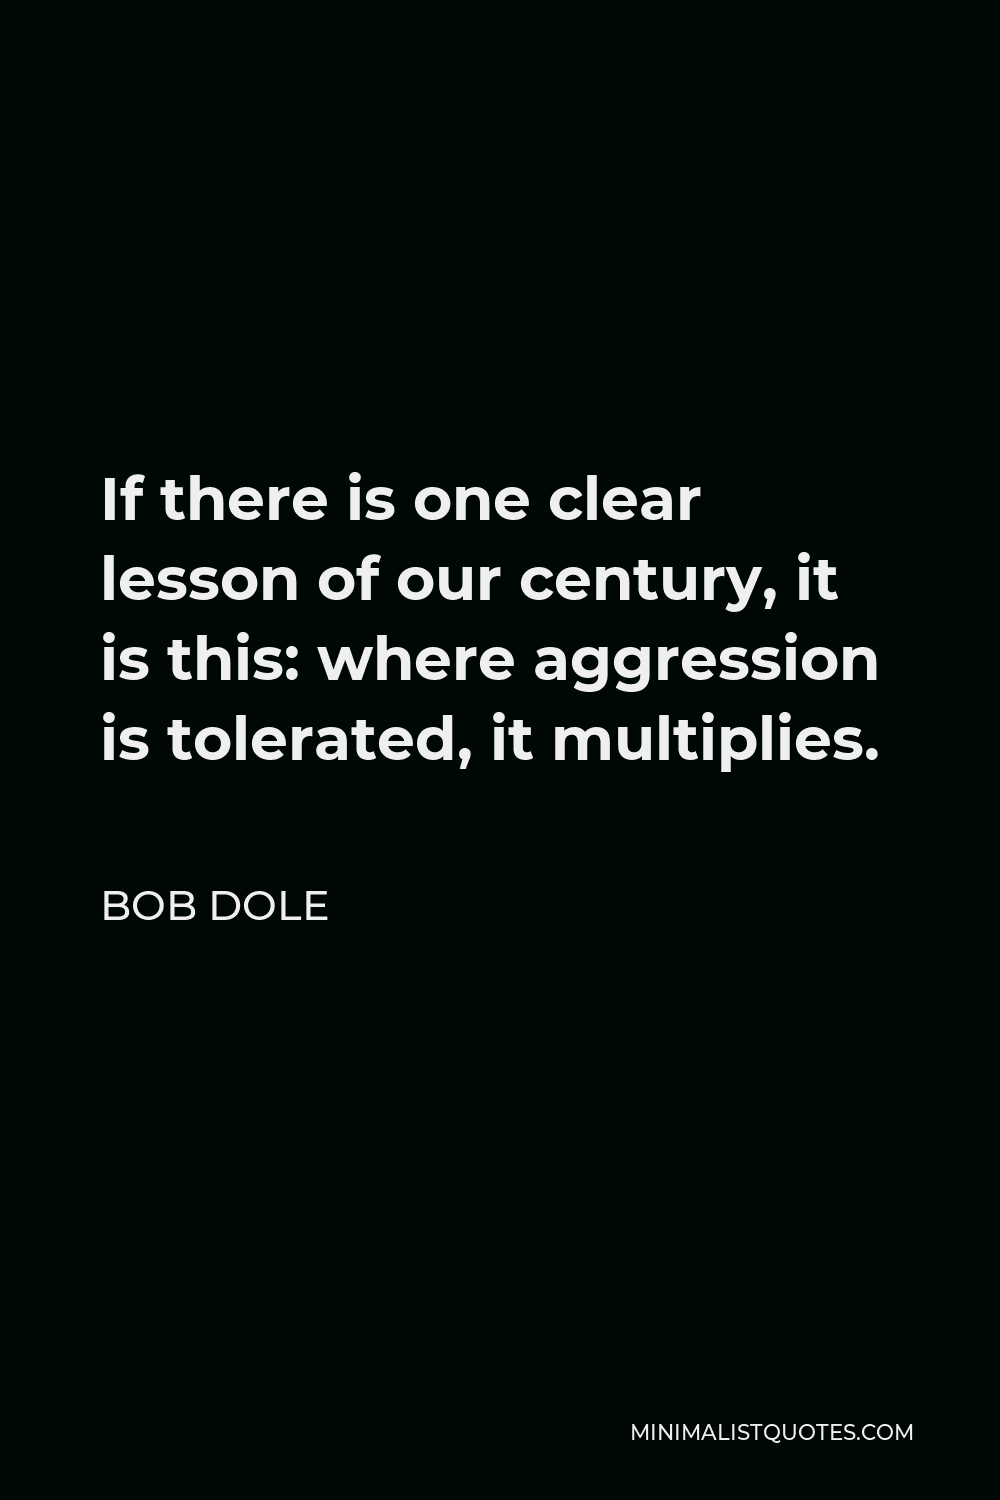 Bob Dole Quote - If there is one clear lesson of our century, it is this: where aggression is tolerated, it multiplies.